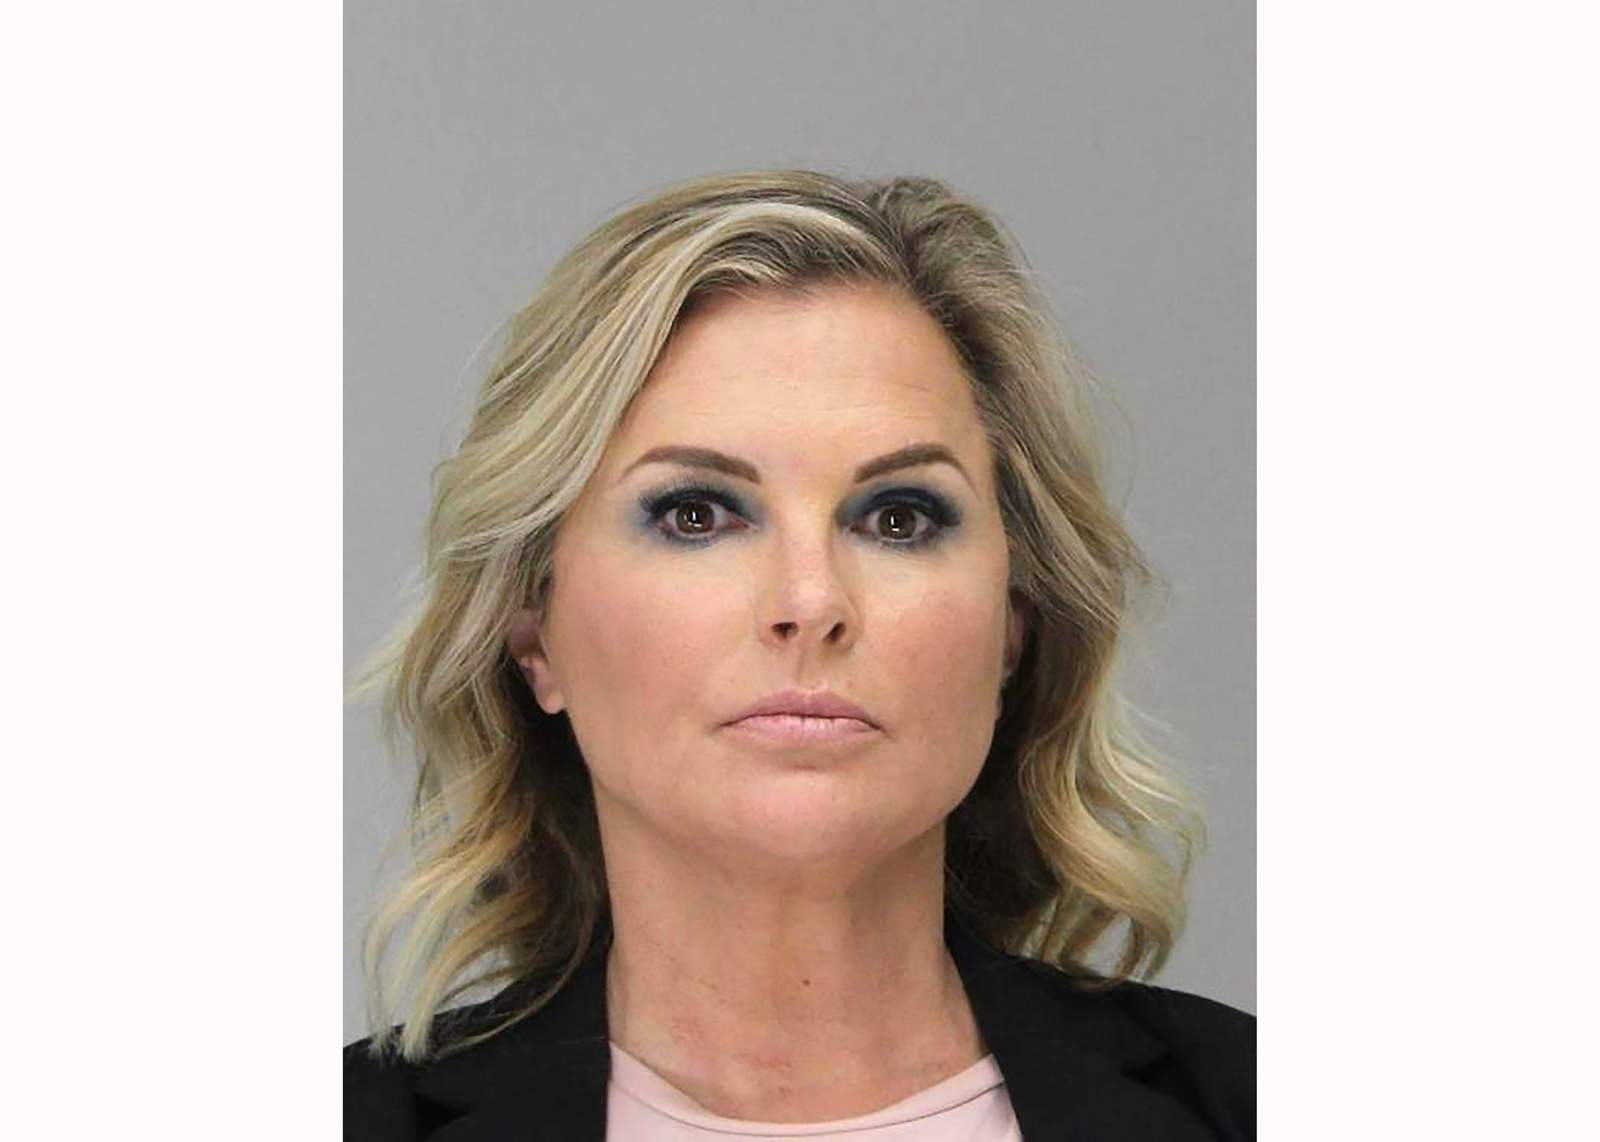 Texas governor, attorney general call for release of Dallas salon owner jailed for keeping business open